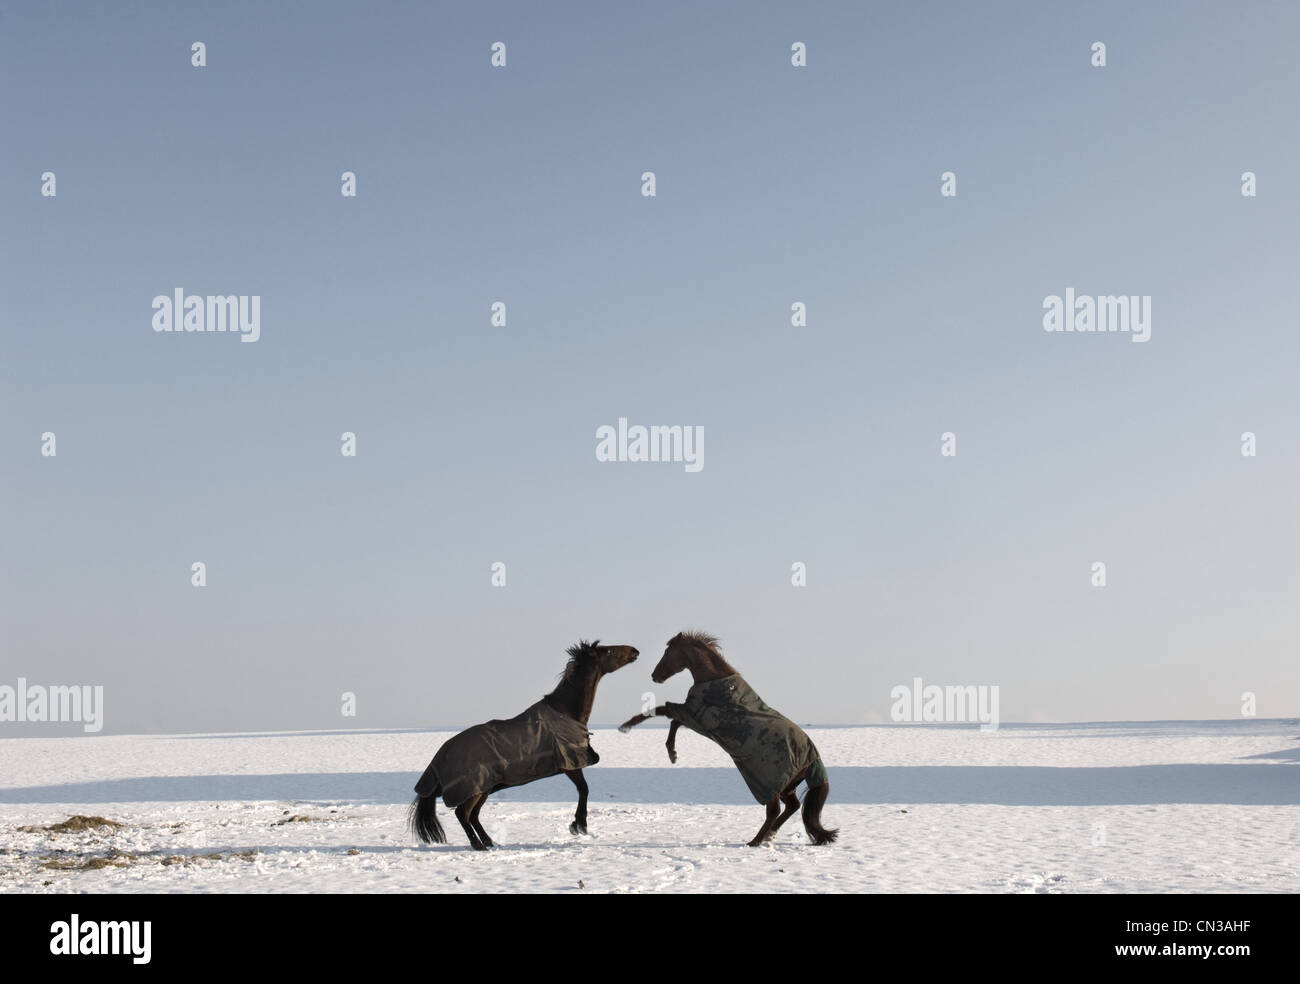 Two horses rearing in snow Stock Photo